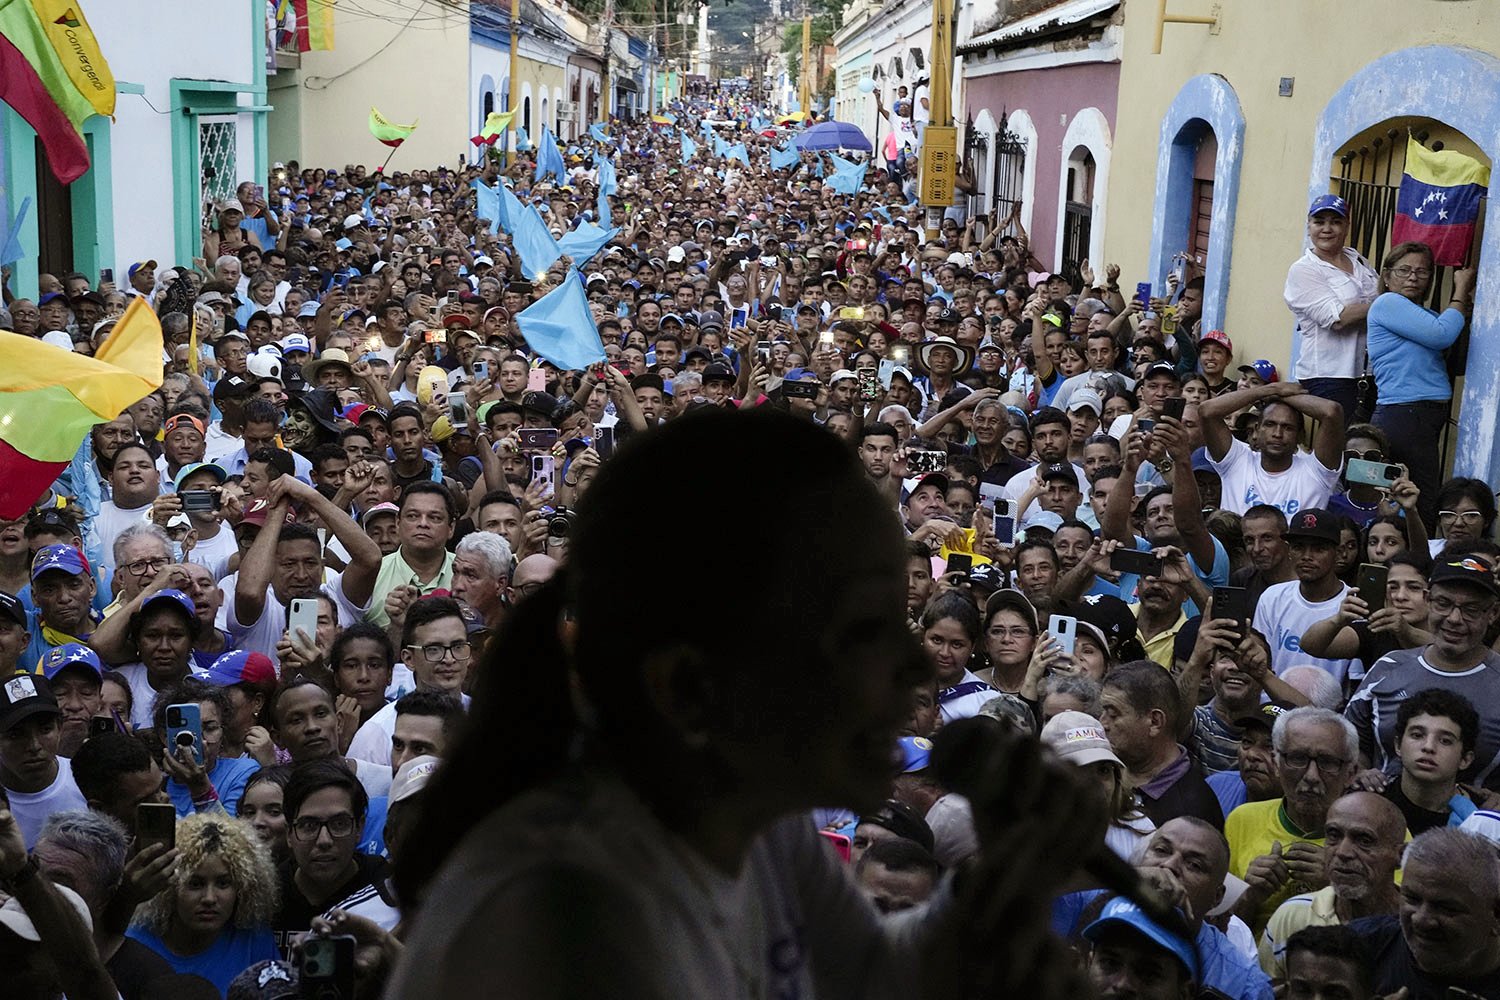  Opposition presidential hopeful Maria Corina Machado speaks to supporters during a rally in Valencia, Carabobo State, Venezuela, Oct. 5, 2023. After Machado won the primary, the chief prosecutor announced a criminal investigation into organizers of 